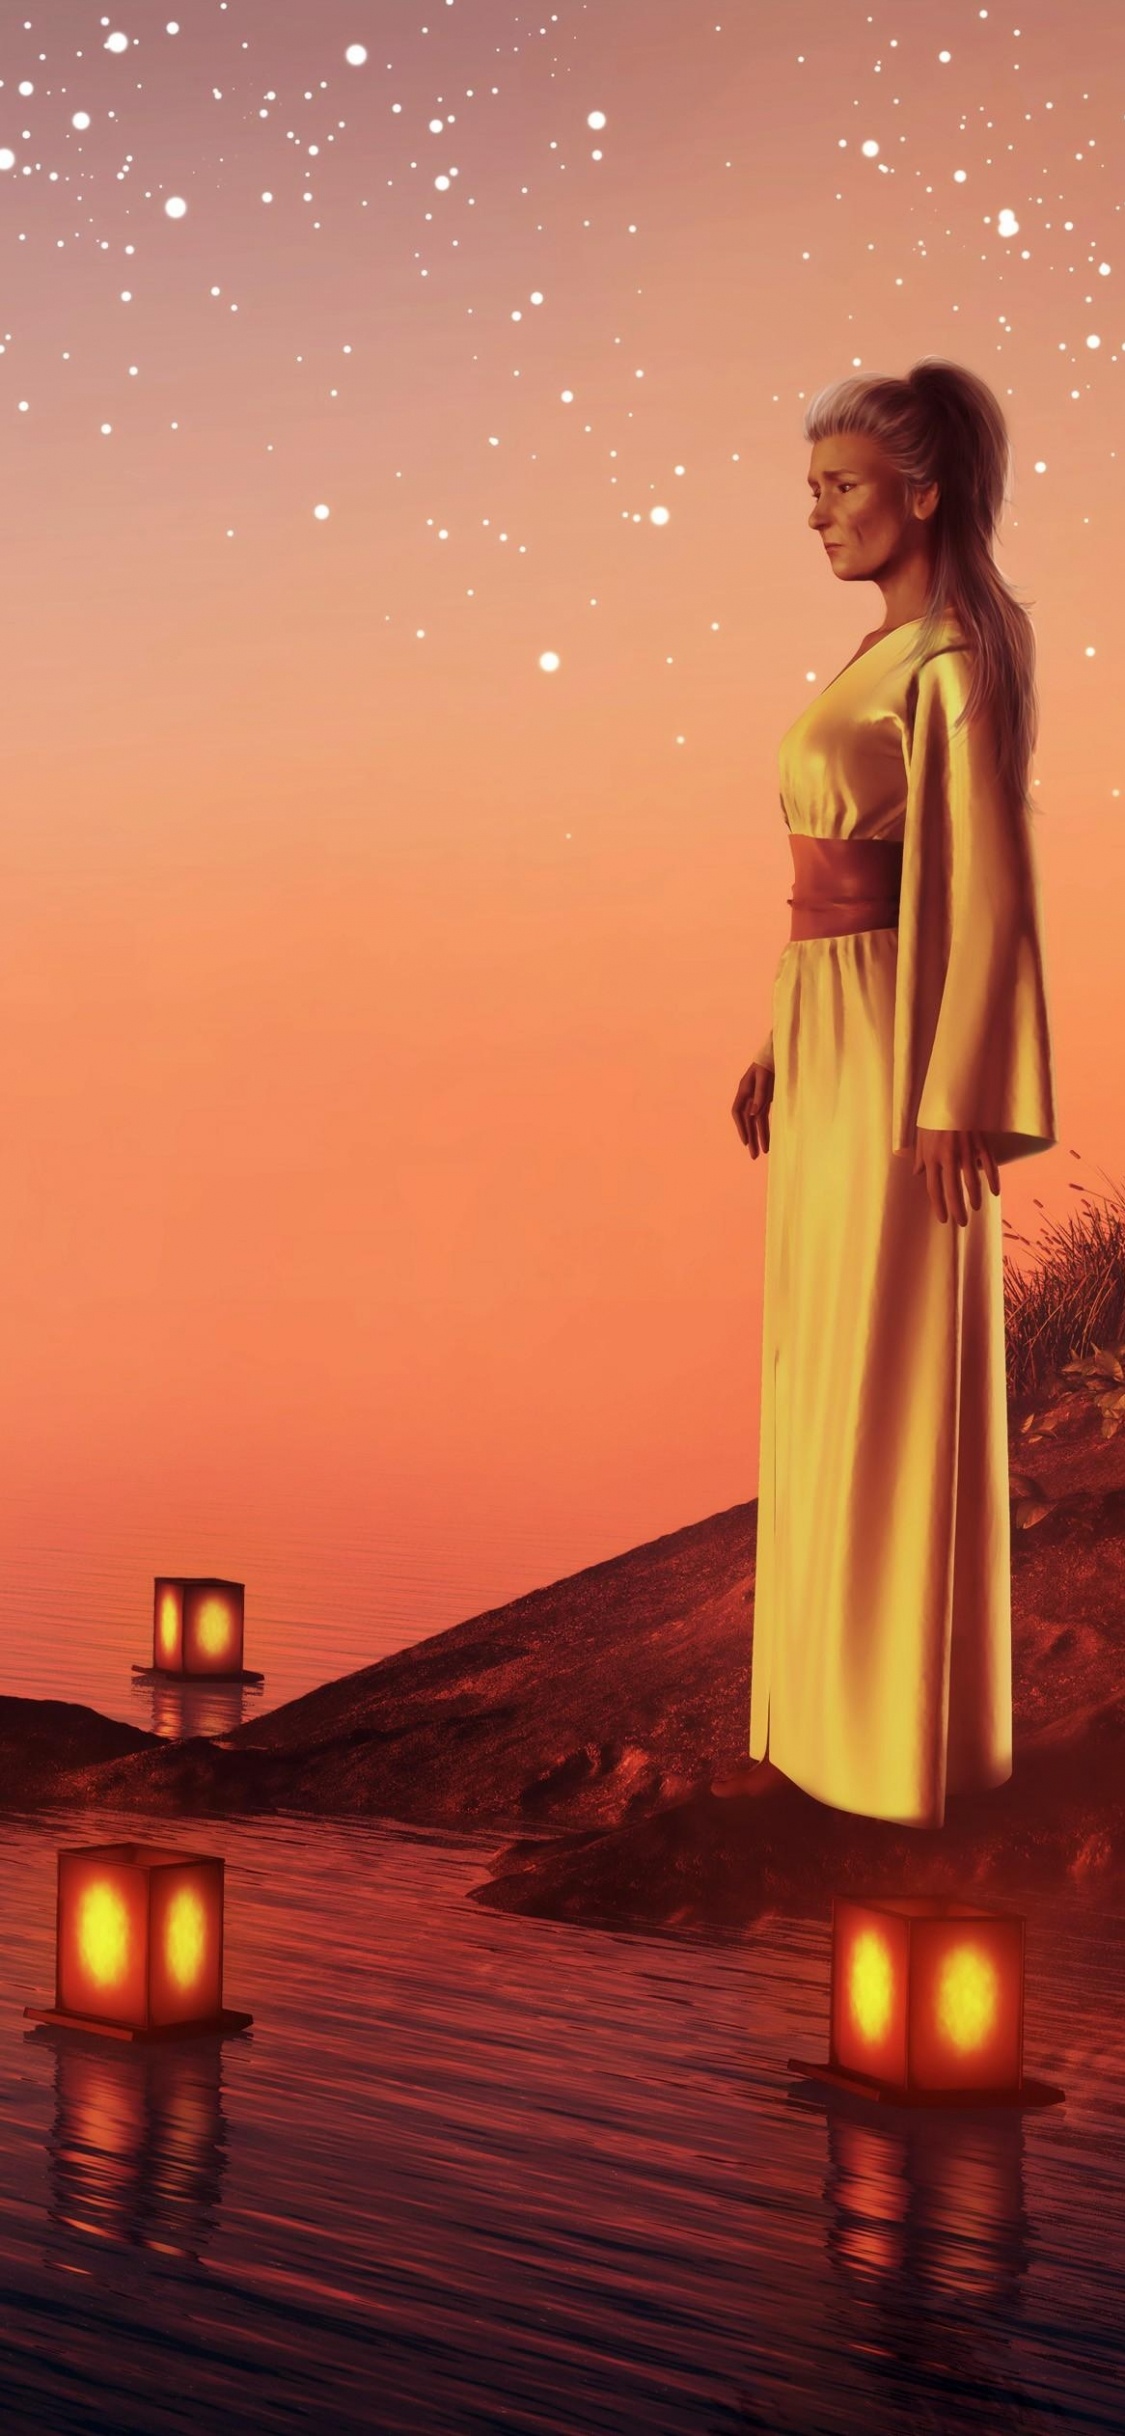 Woman in White Dress Standing on Dock During Sunset. Wallpaper in 1125x2436 Resolution